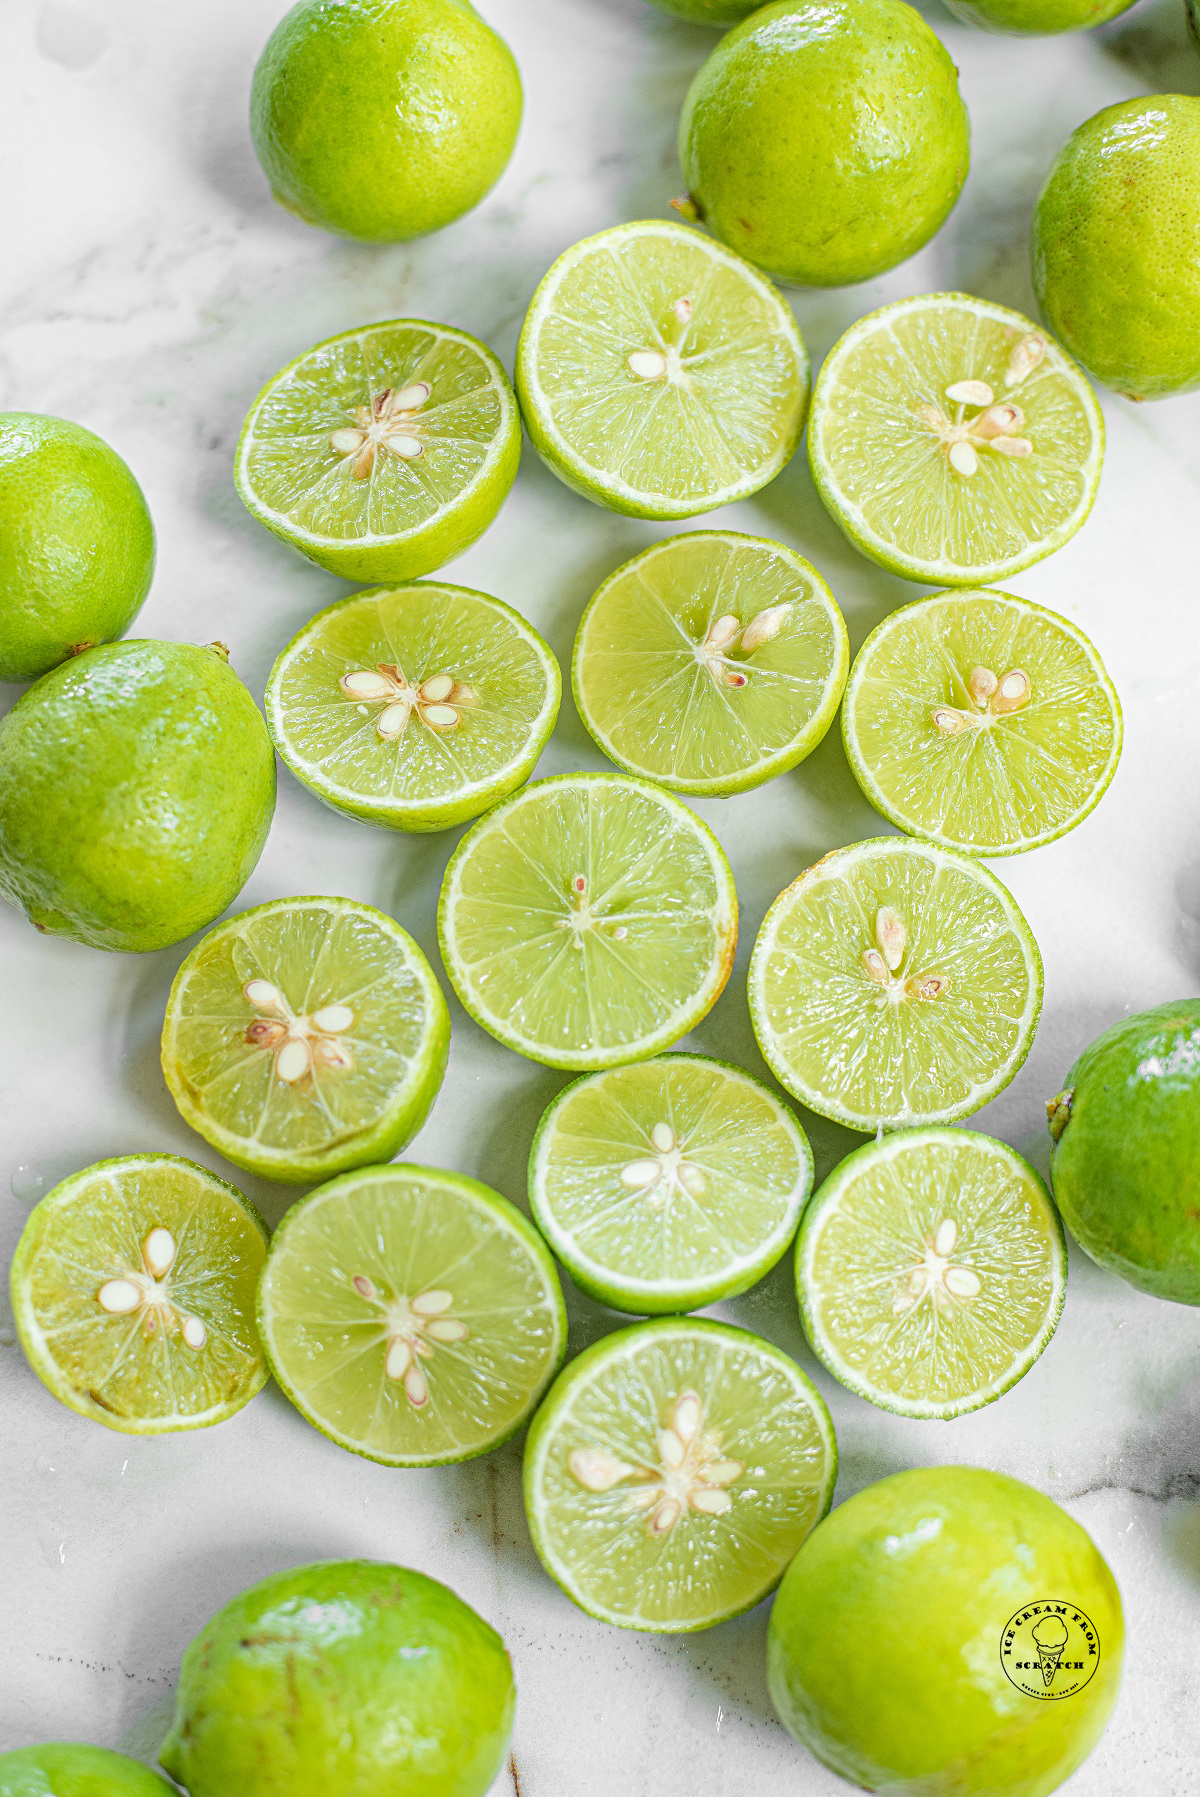 limes, cut in half, spread out on a marble counter